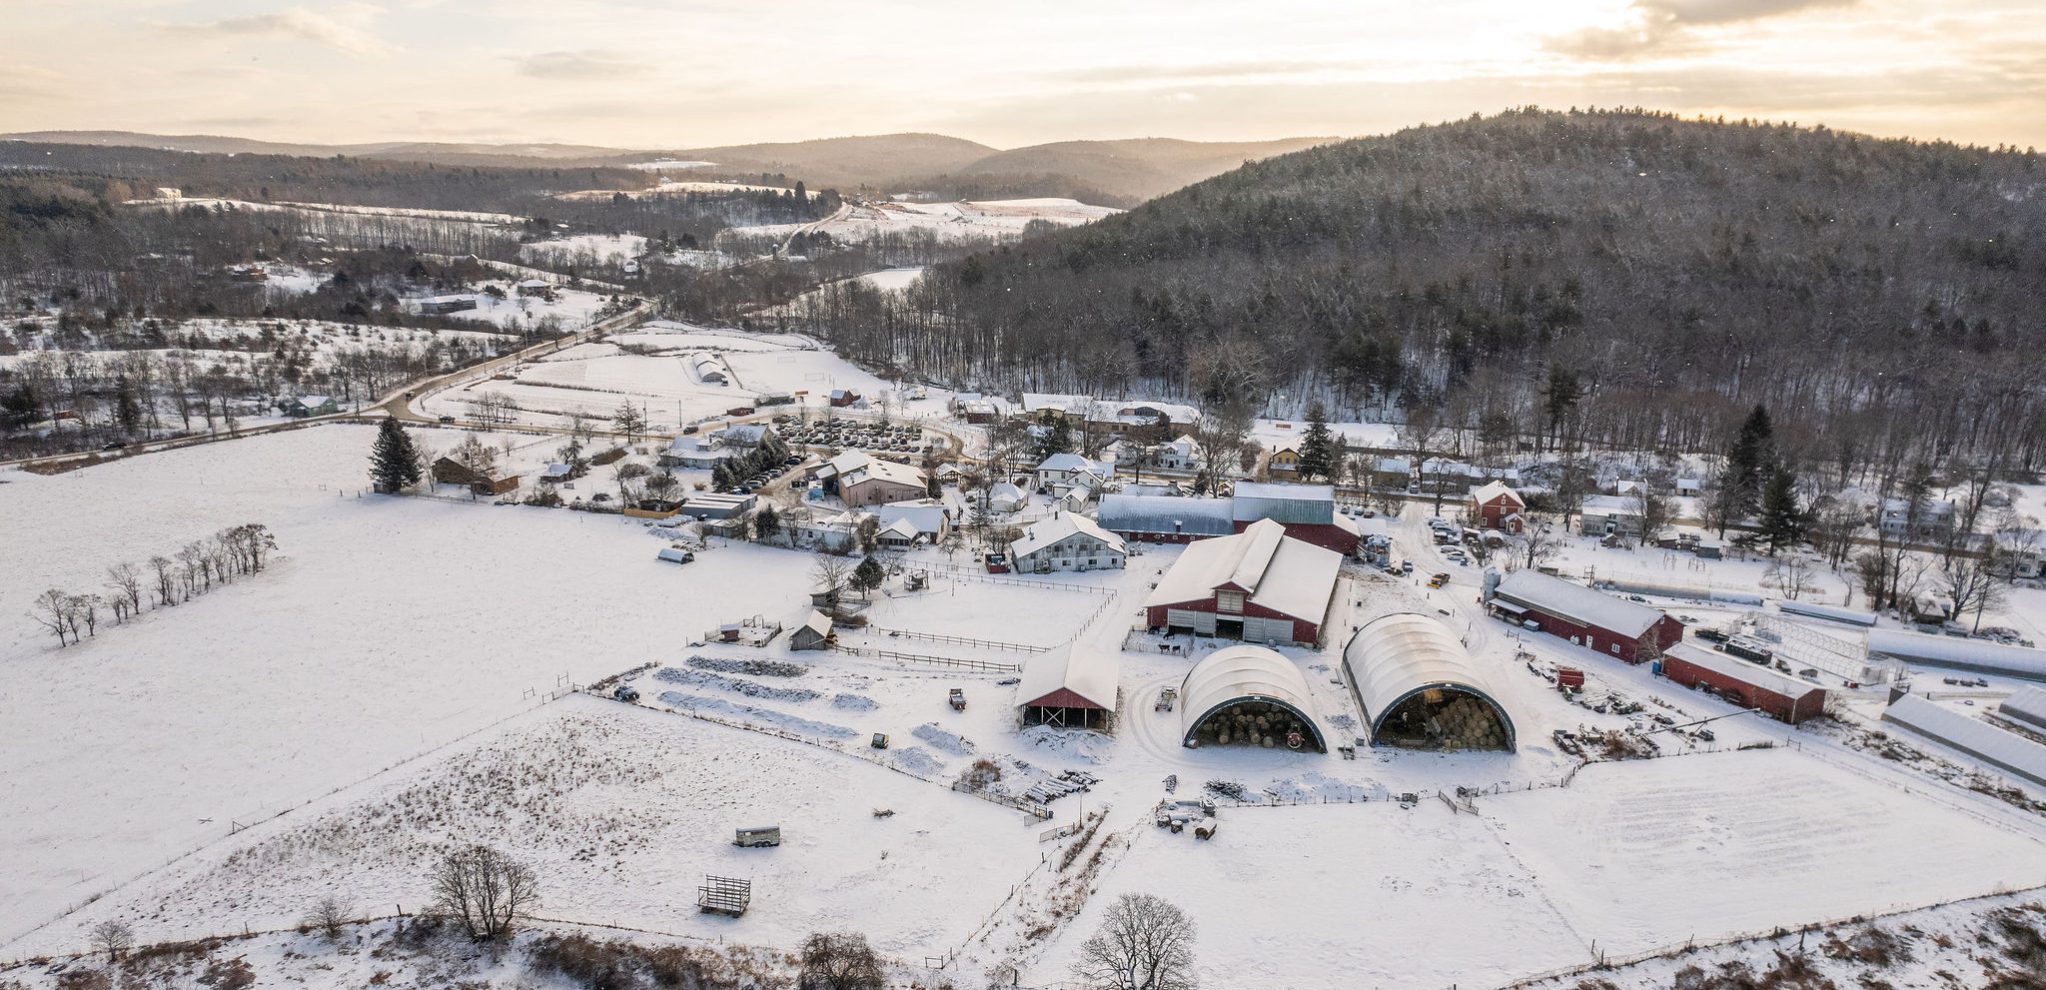 View of whole campus, including the farm buildings, in winter. It was taken during sunrise and there's a blanket of newly fallen snow